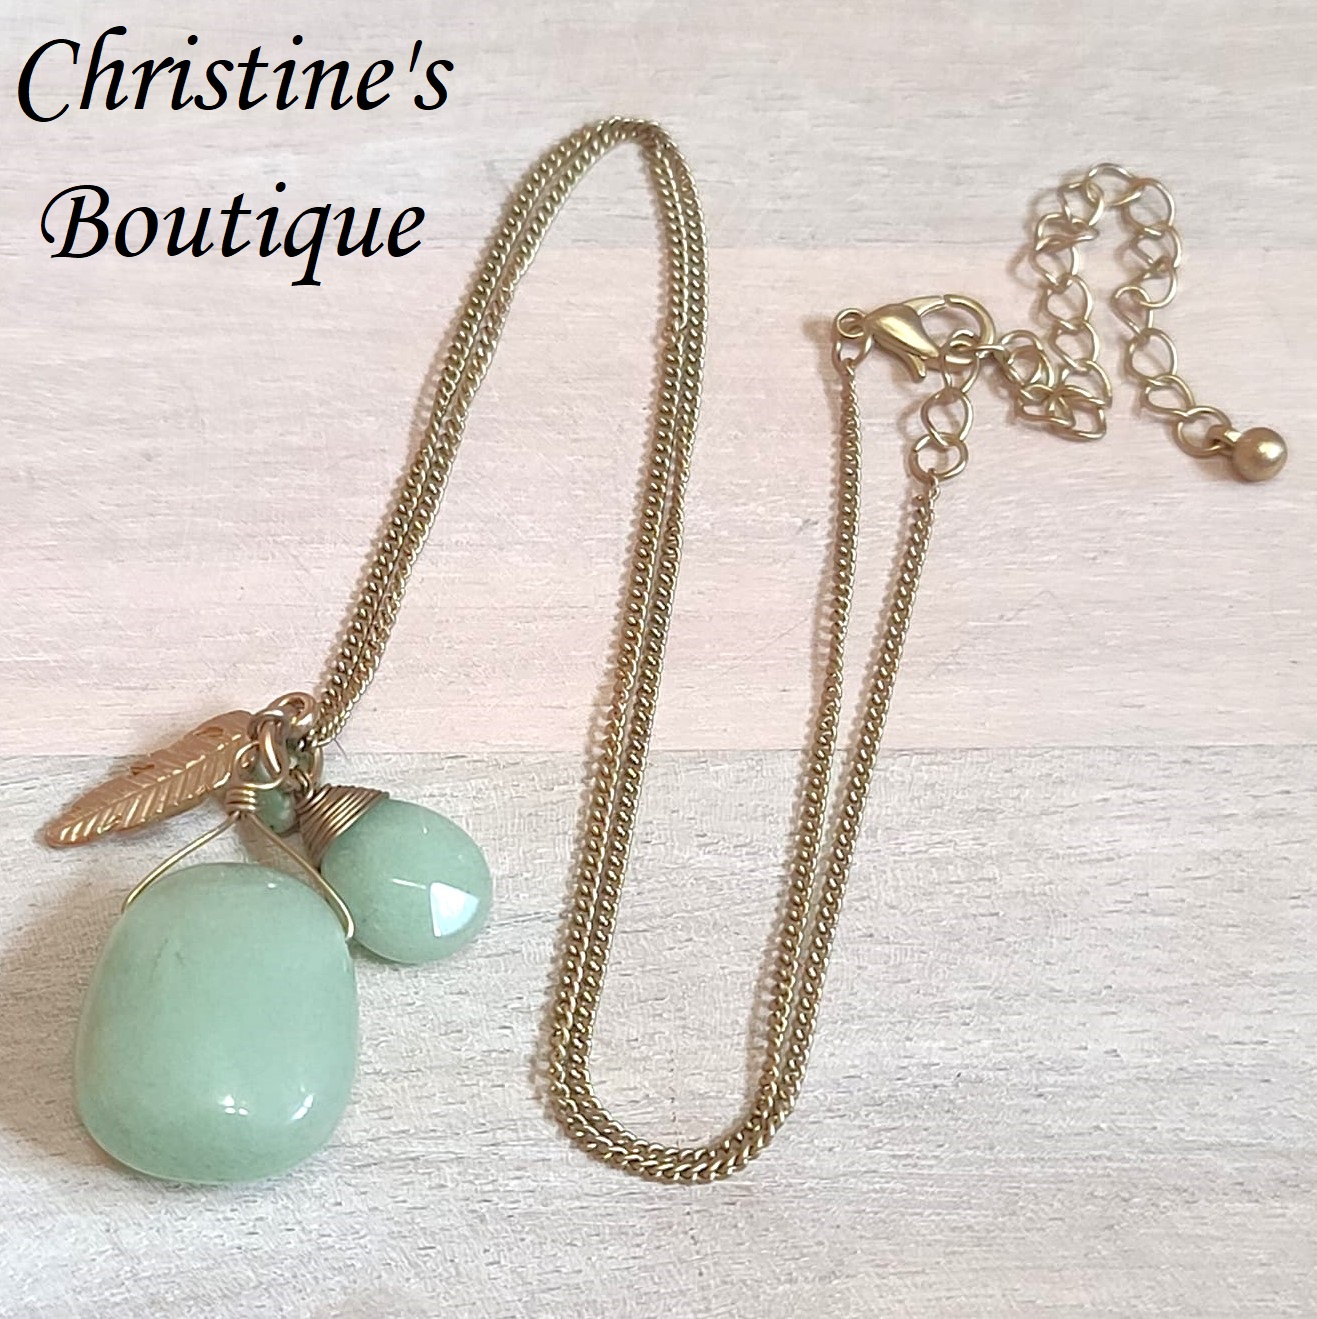 Gemstone pendant necklace, jade gemstone pendant, with feather charm, necklace - Click Image to Close